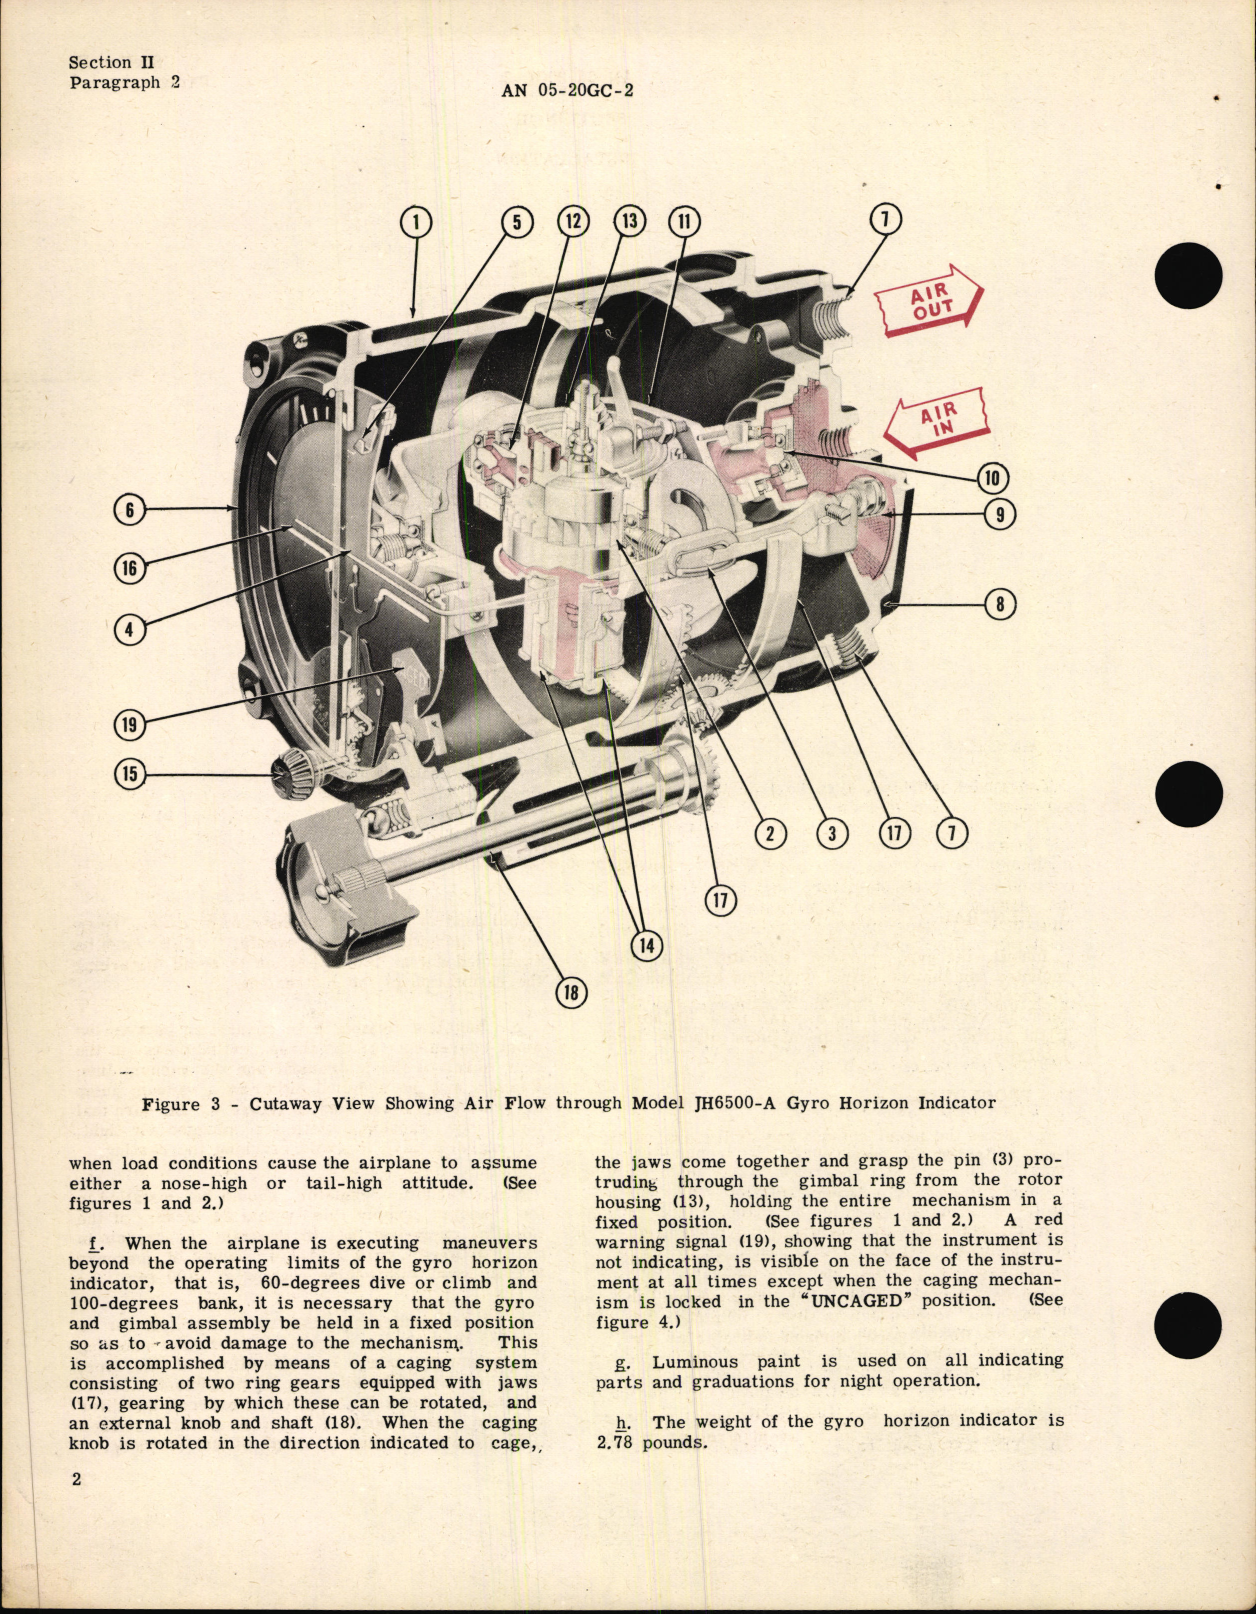 Sample page 6 from AirCorps Library document: Operation, Service, & Overhaul Instructions with Parts Catalog for Type AN 5736-1 F.S.S.C. 88-I-1350 Gyro Horizon Indicator